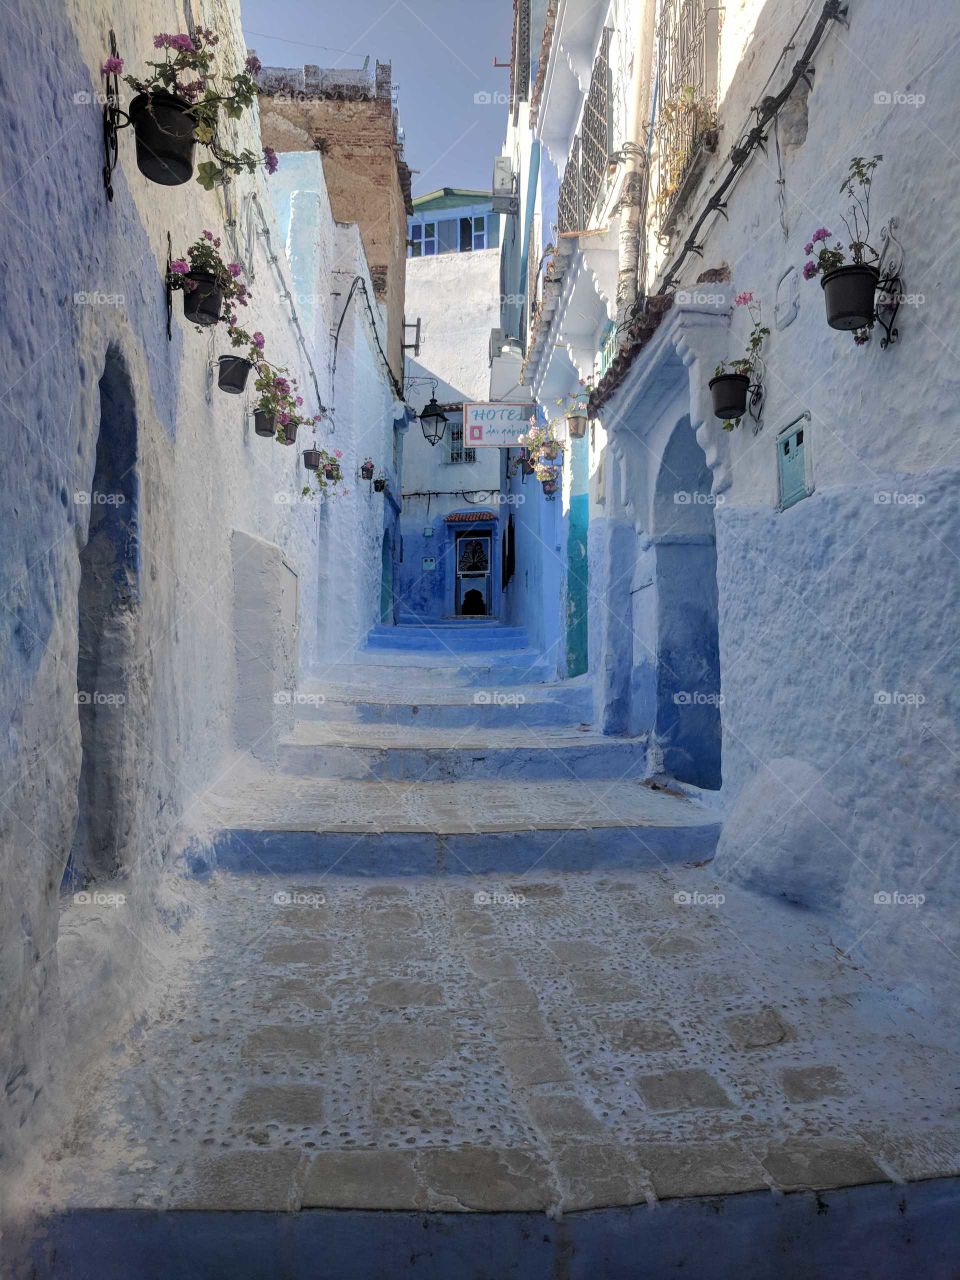 Blue Alley/Street Lined with Colorful Hanging Flower Boxes in the Blue Medina of Chefchaouen (the Blue City) in Morocco